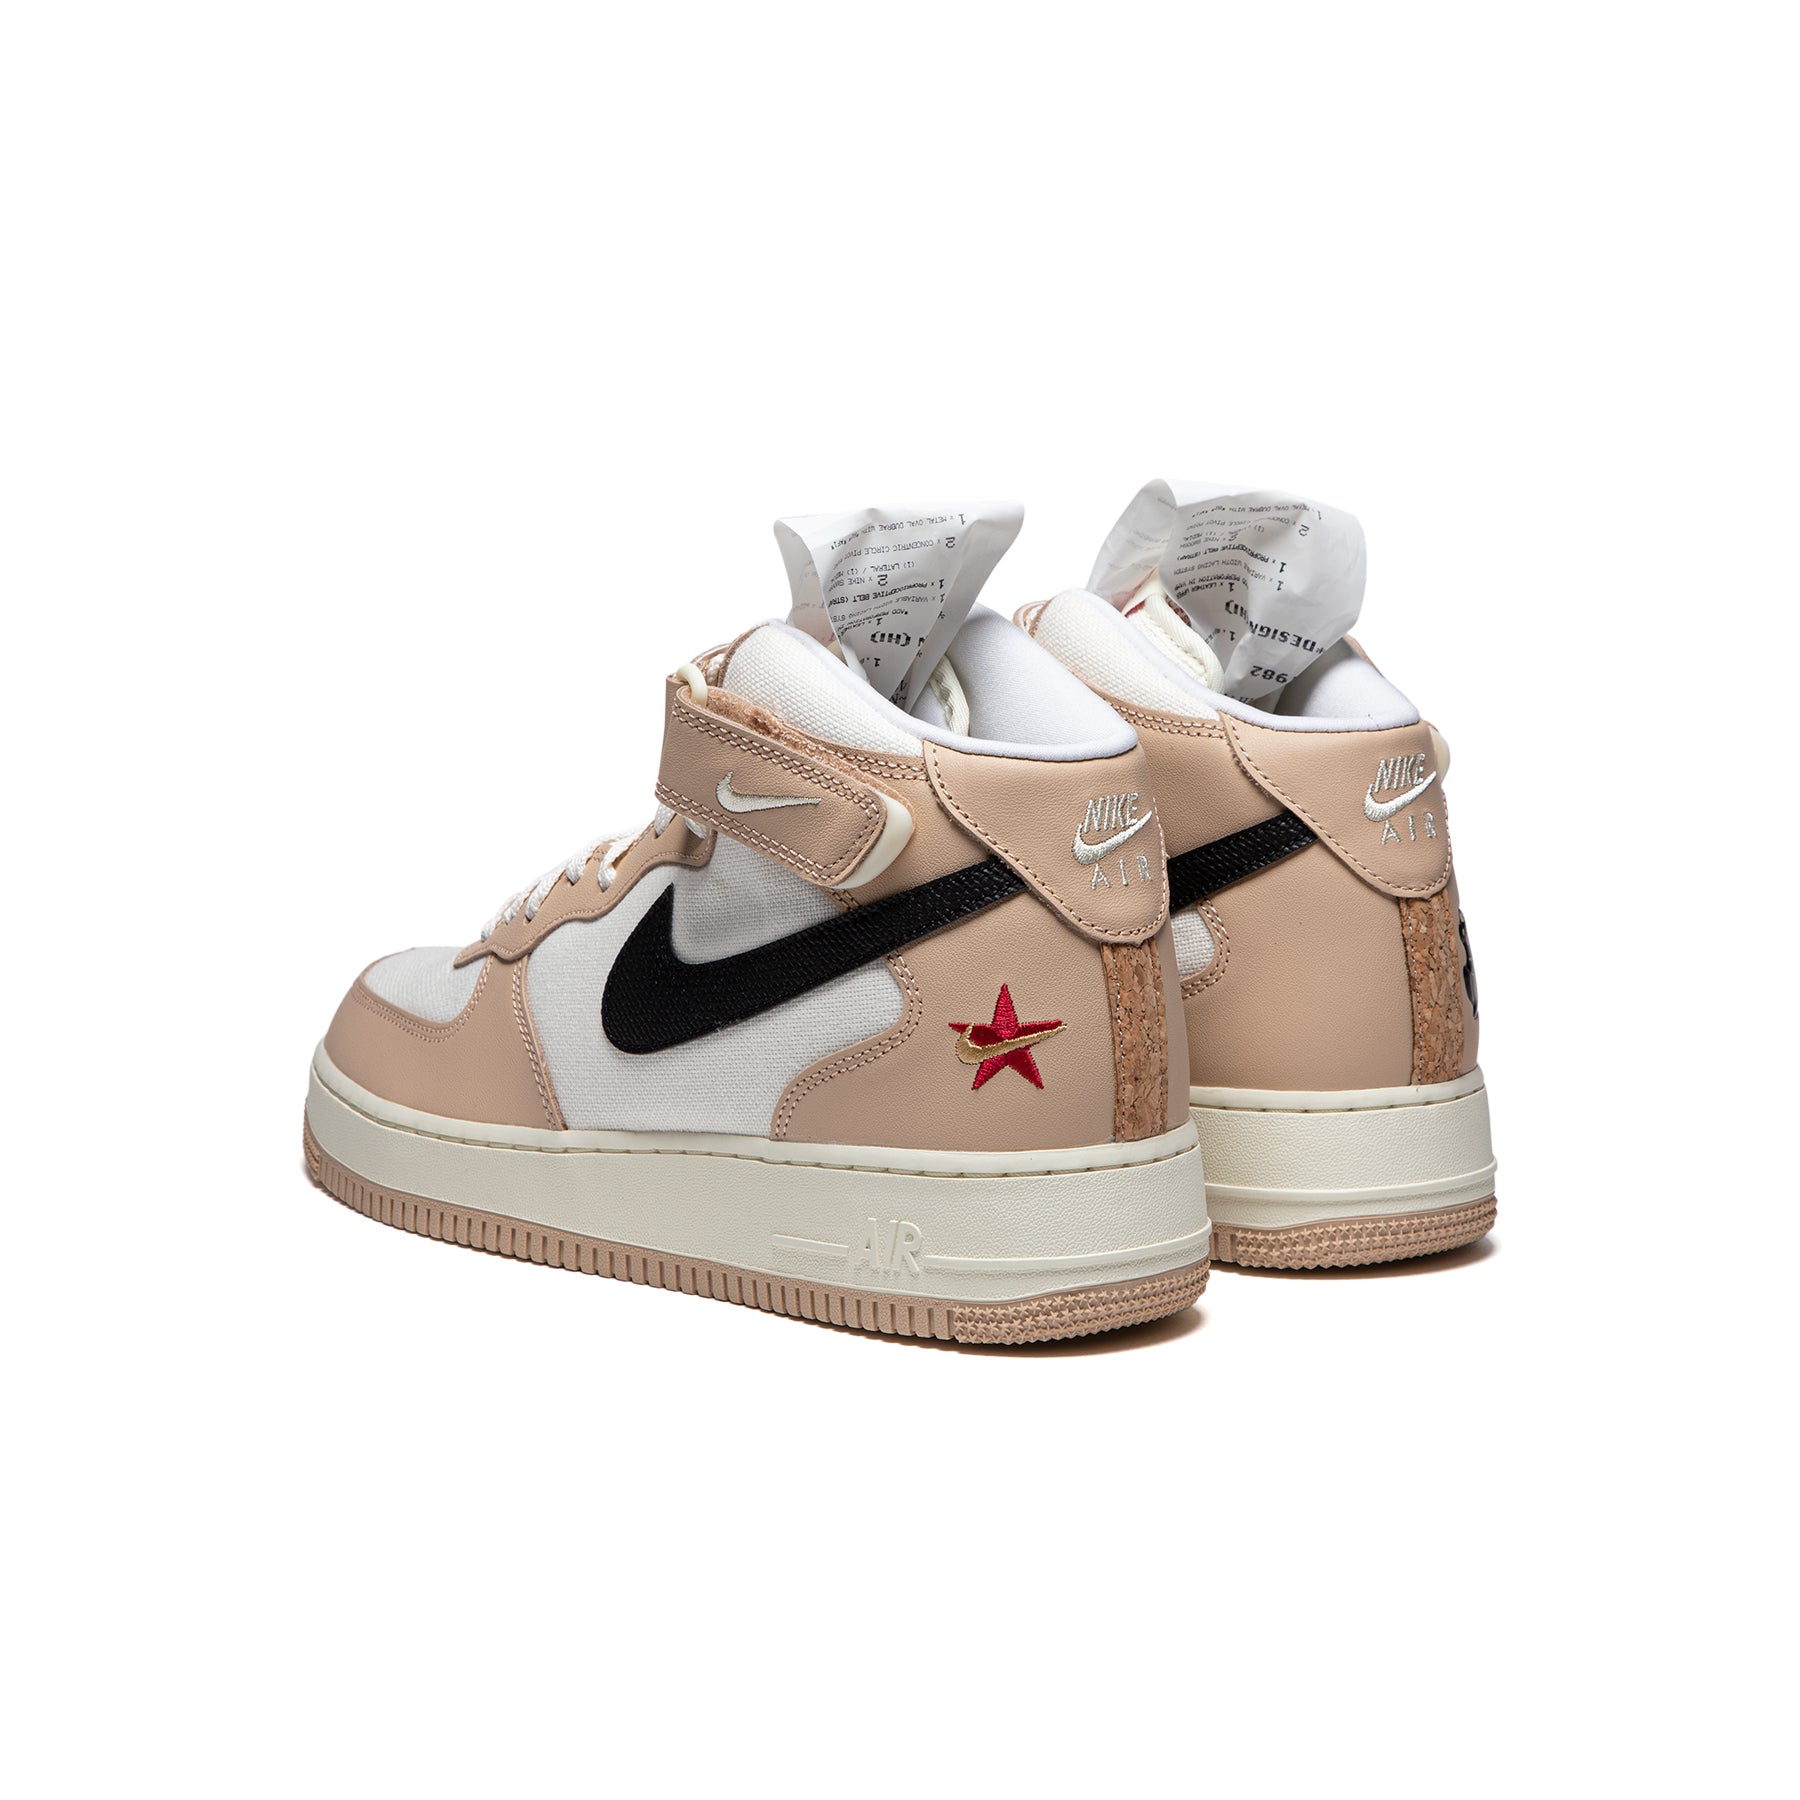 Nike Air Force 1 '07 LX - 9.5 / PALE IVORY in 2023